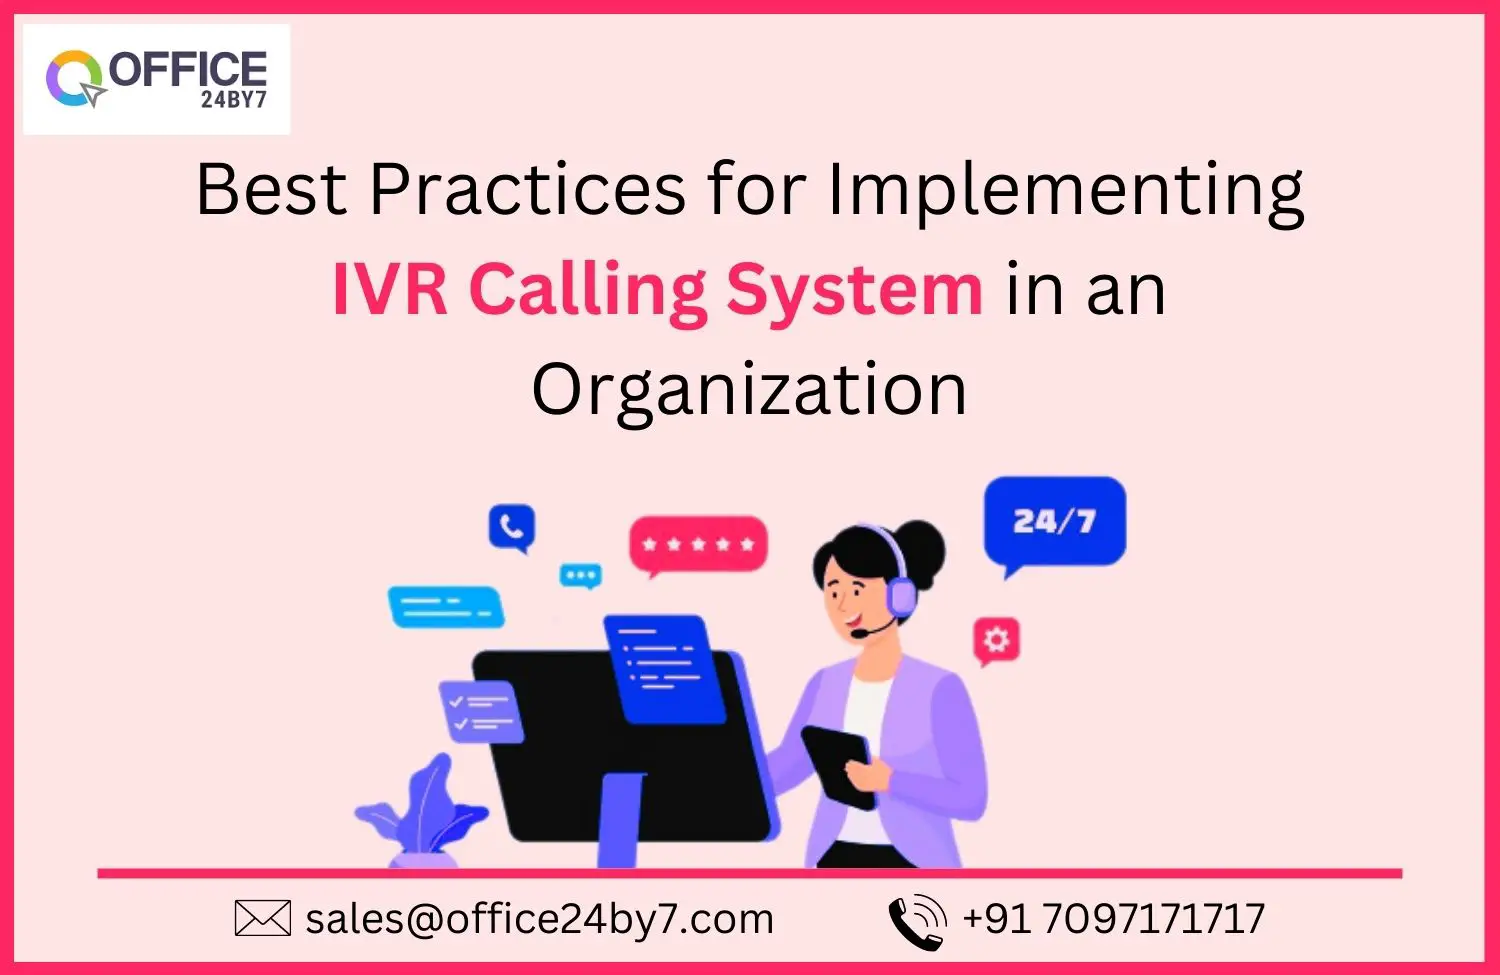 Best Practices for Implementing IVR Calling System in an Organization